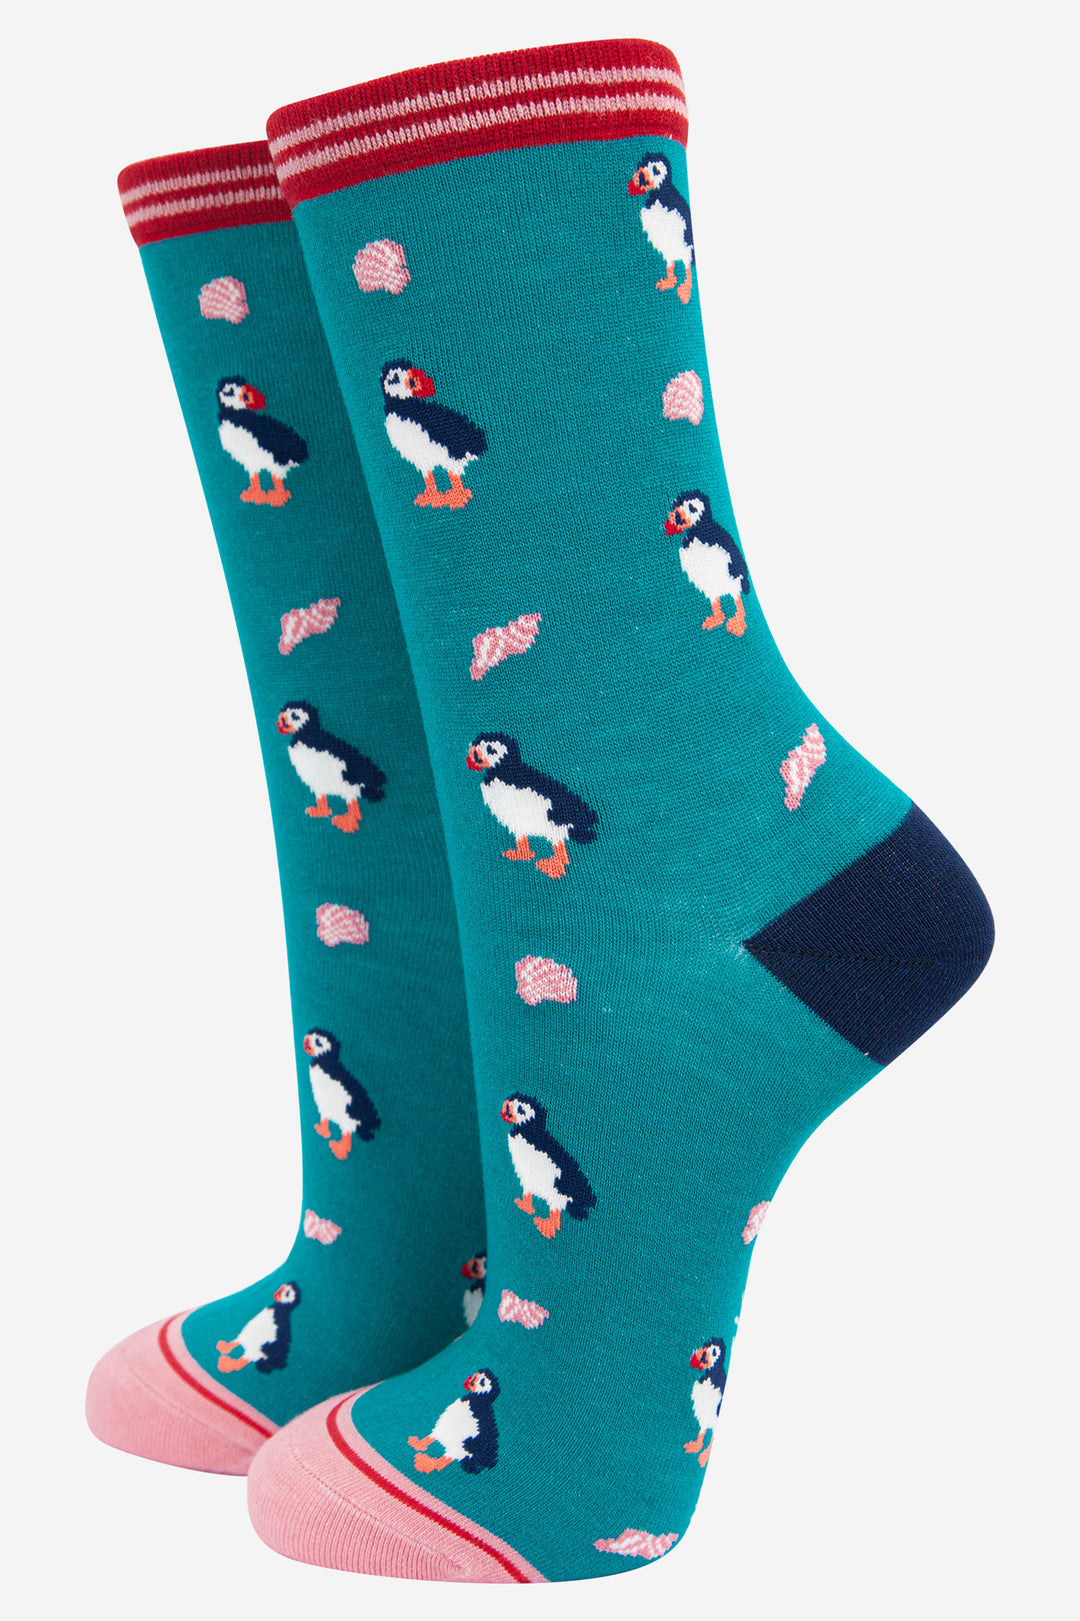 turquoise bamboo socks with an all over puffin bird and seashell pattern